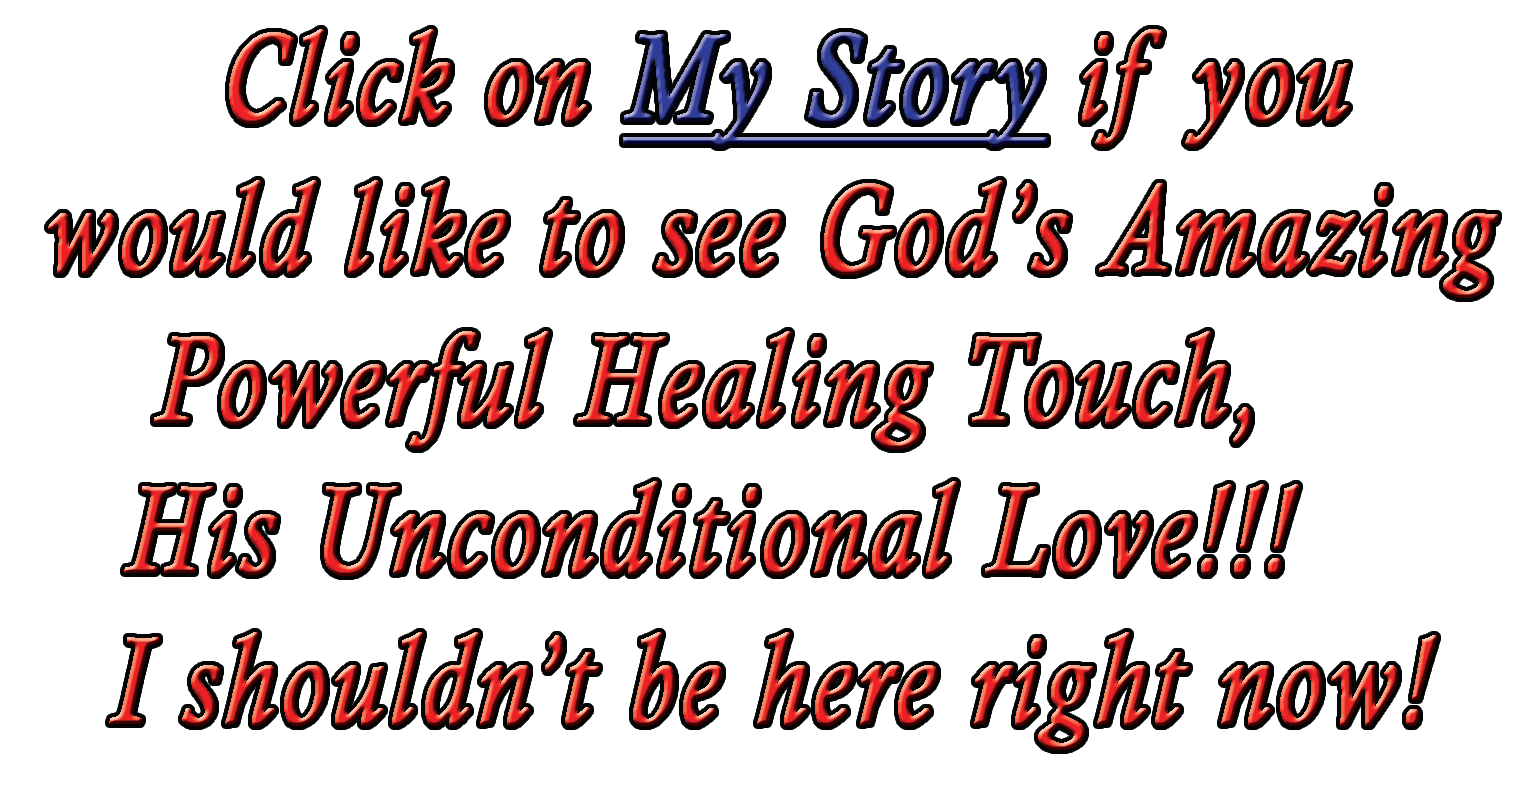 Real Testimony / Miracle / Grace / Mercy / Unconditional Love and Prayer